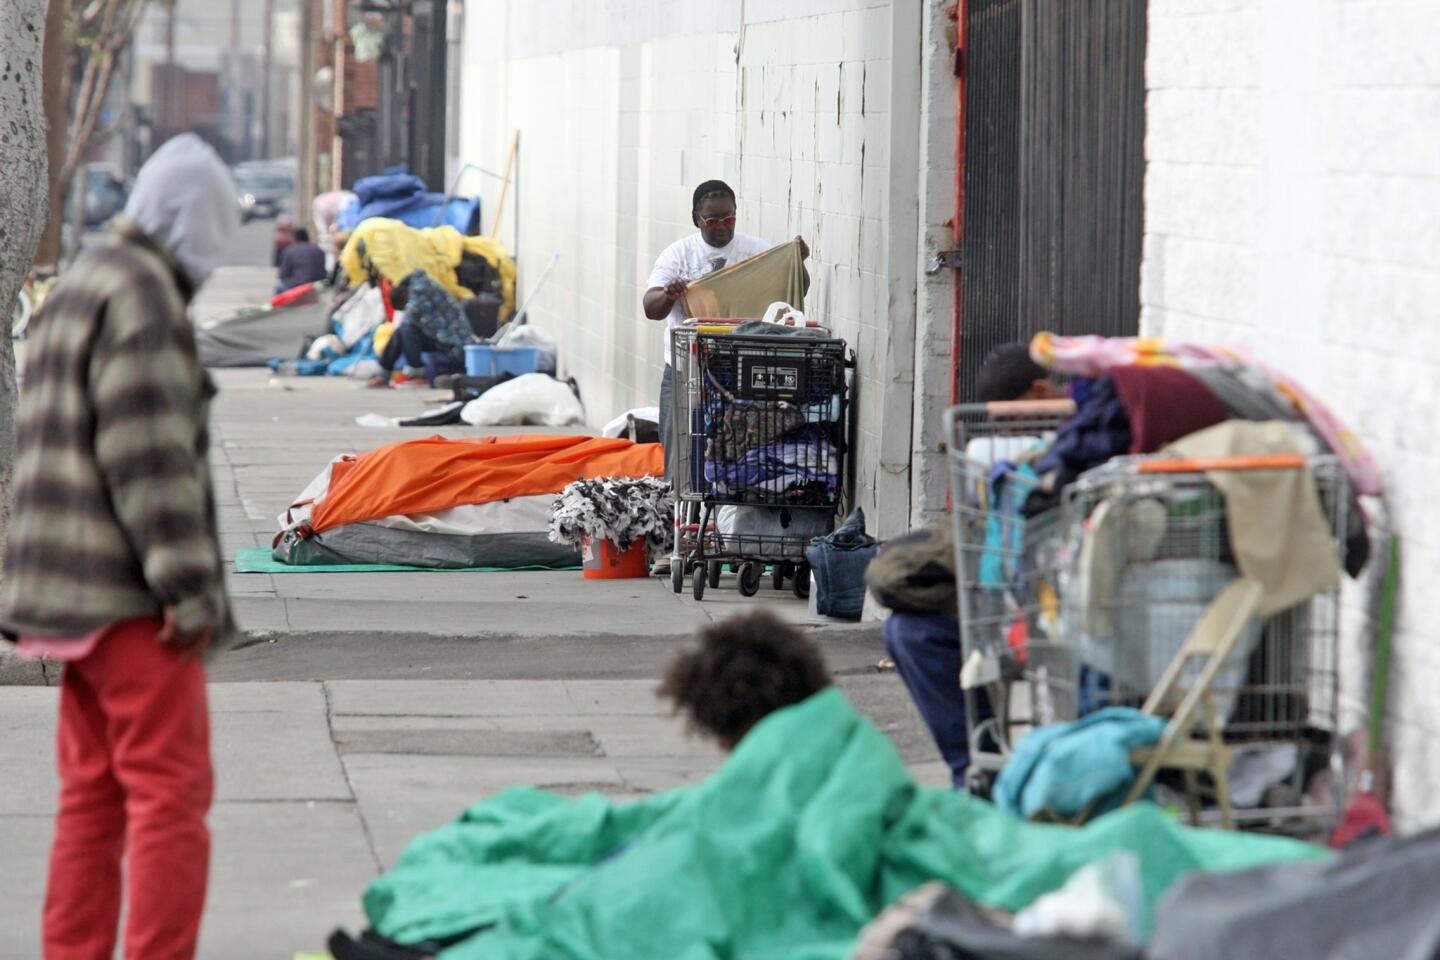 Another day on skid row